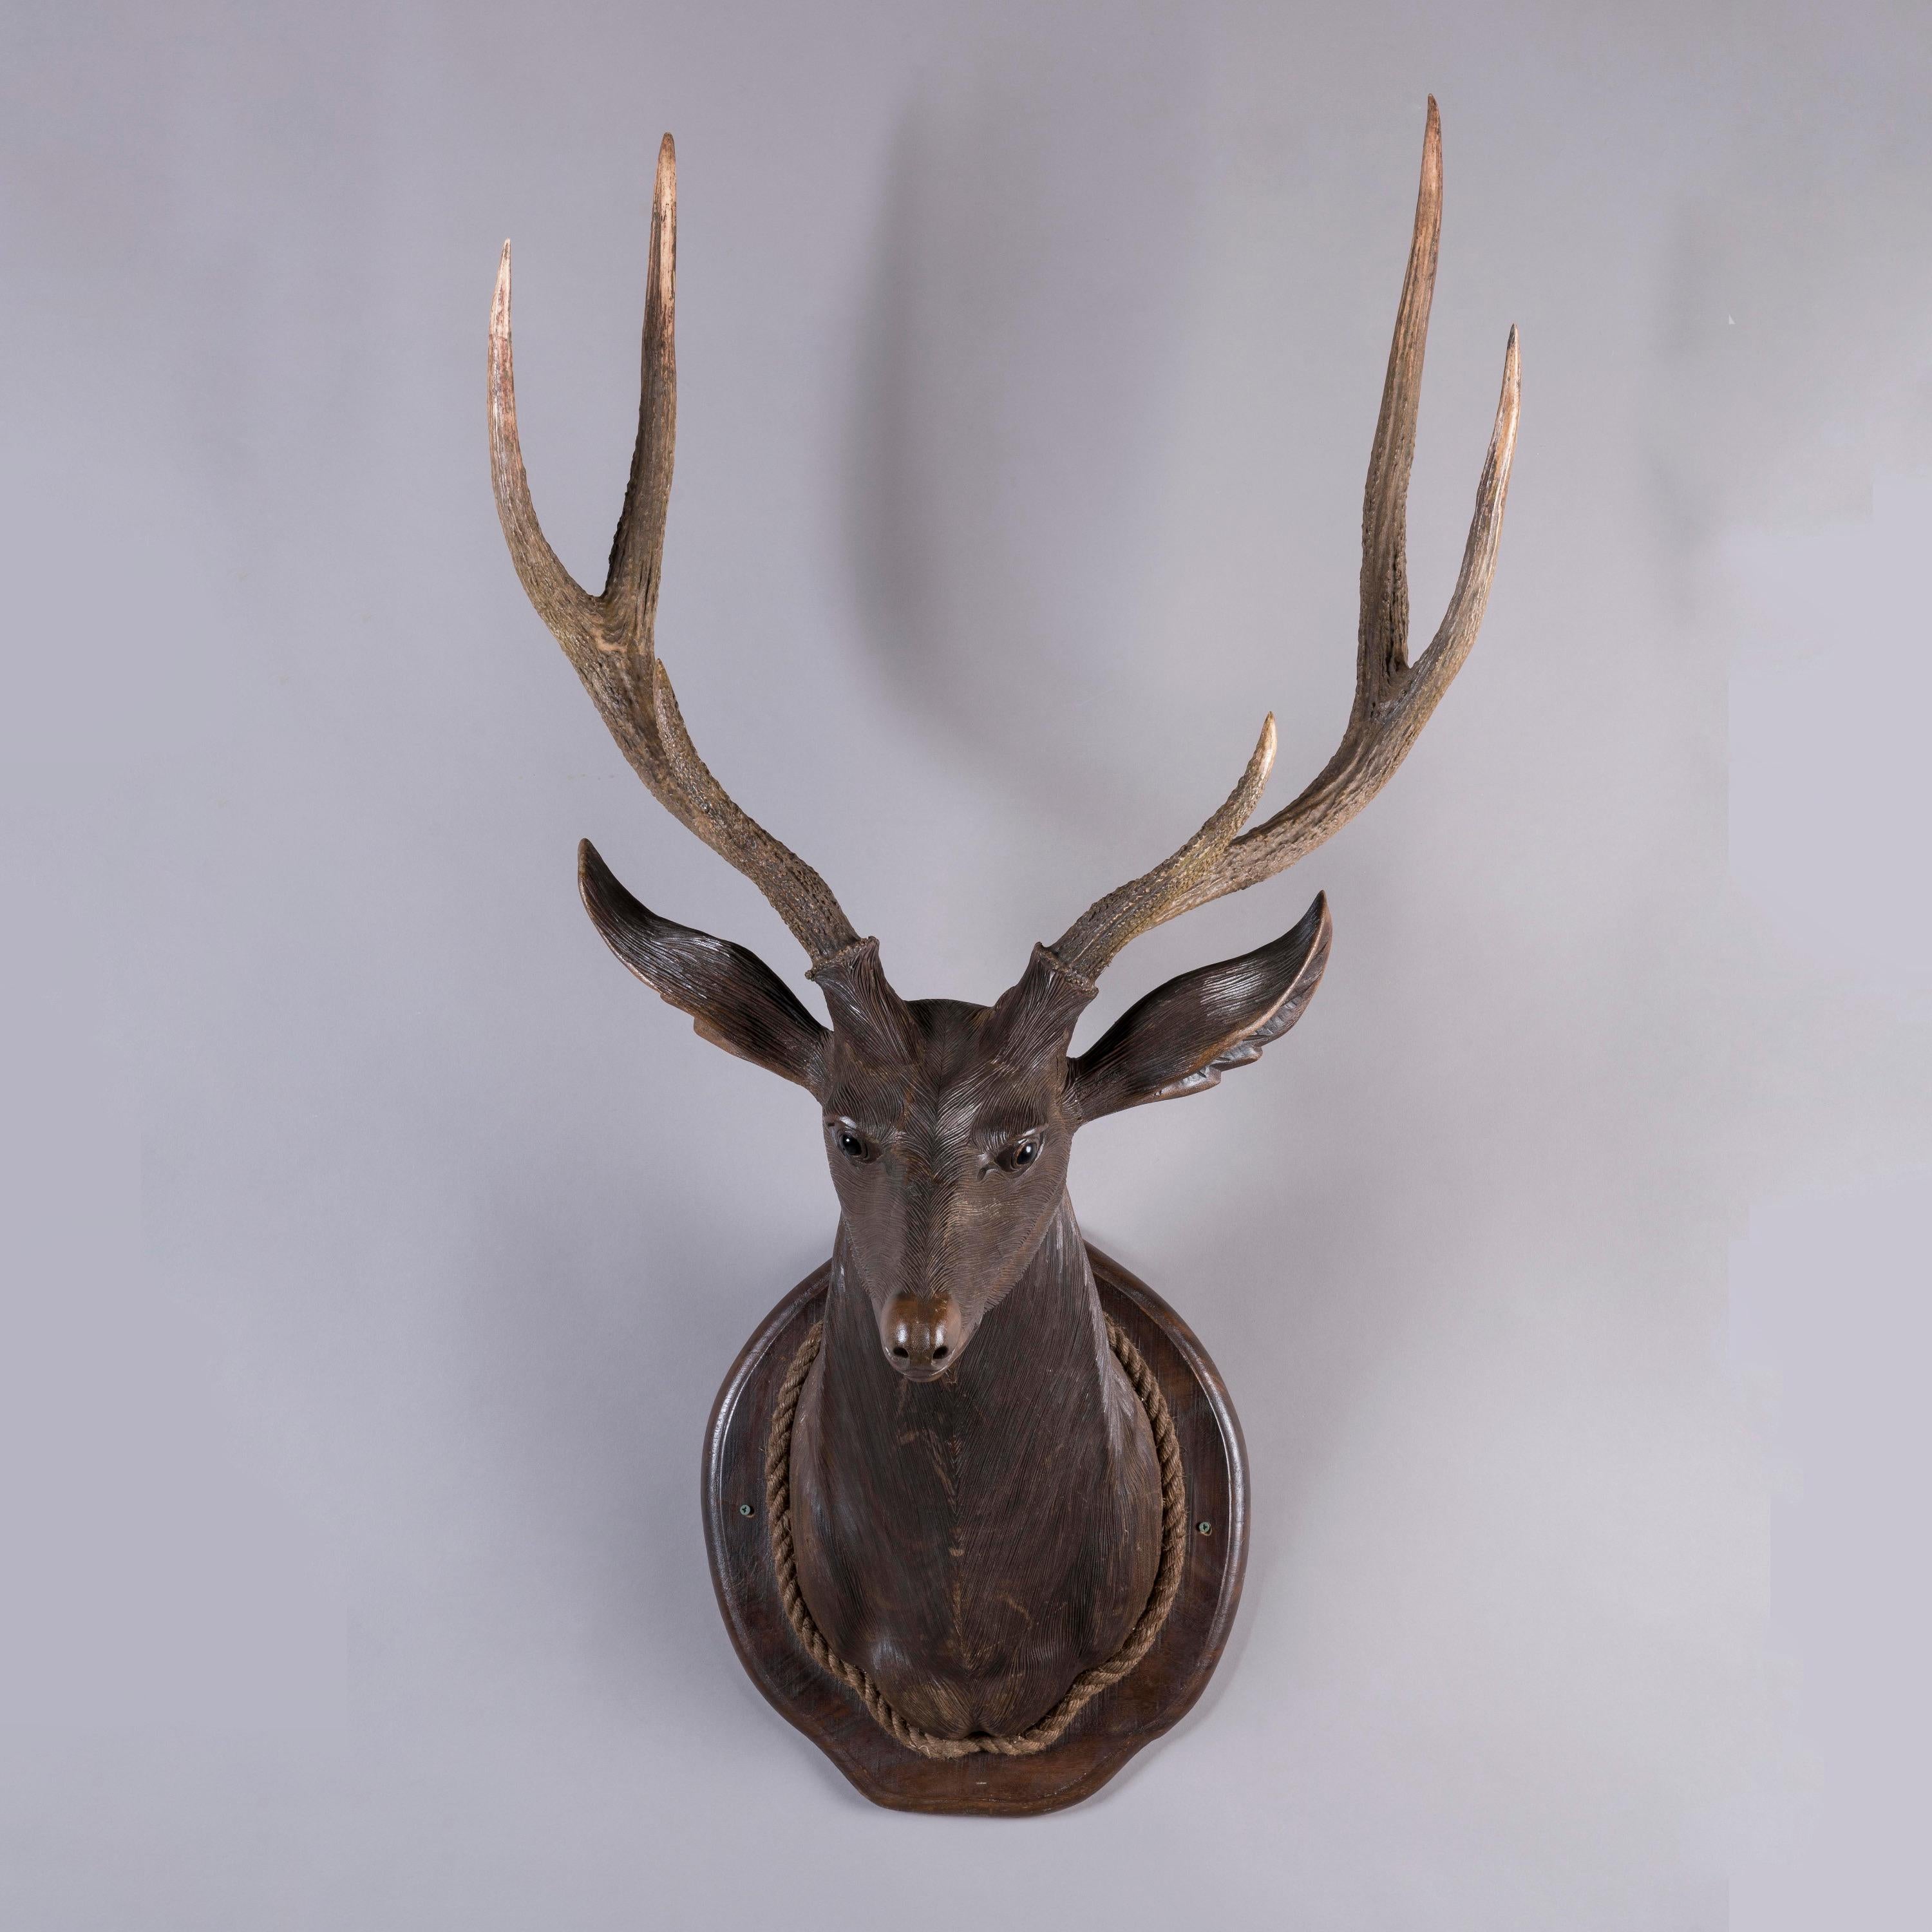 A Rare Life-Sized Black Forest Stag's Head

Carved from Lindenwood, the deer head with realistic fur effect, patination, and glass inset eyes in conjunction with the real three-tined antlers. Mounted on its original moulded bird finished with